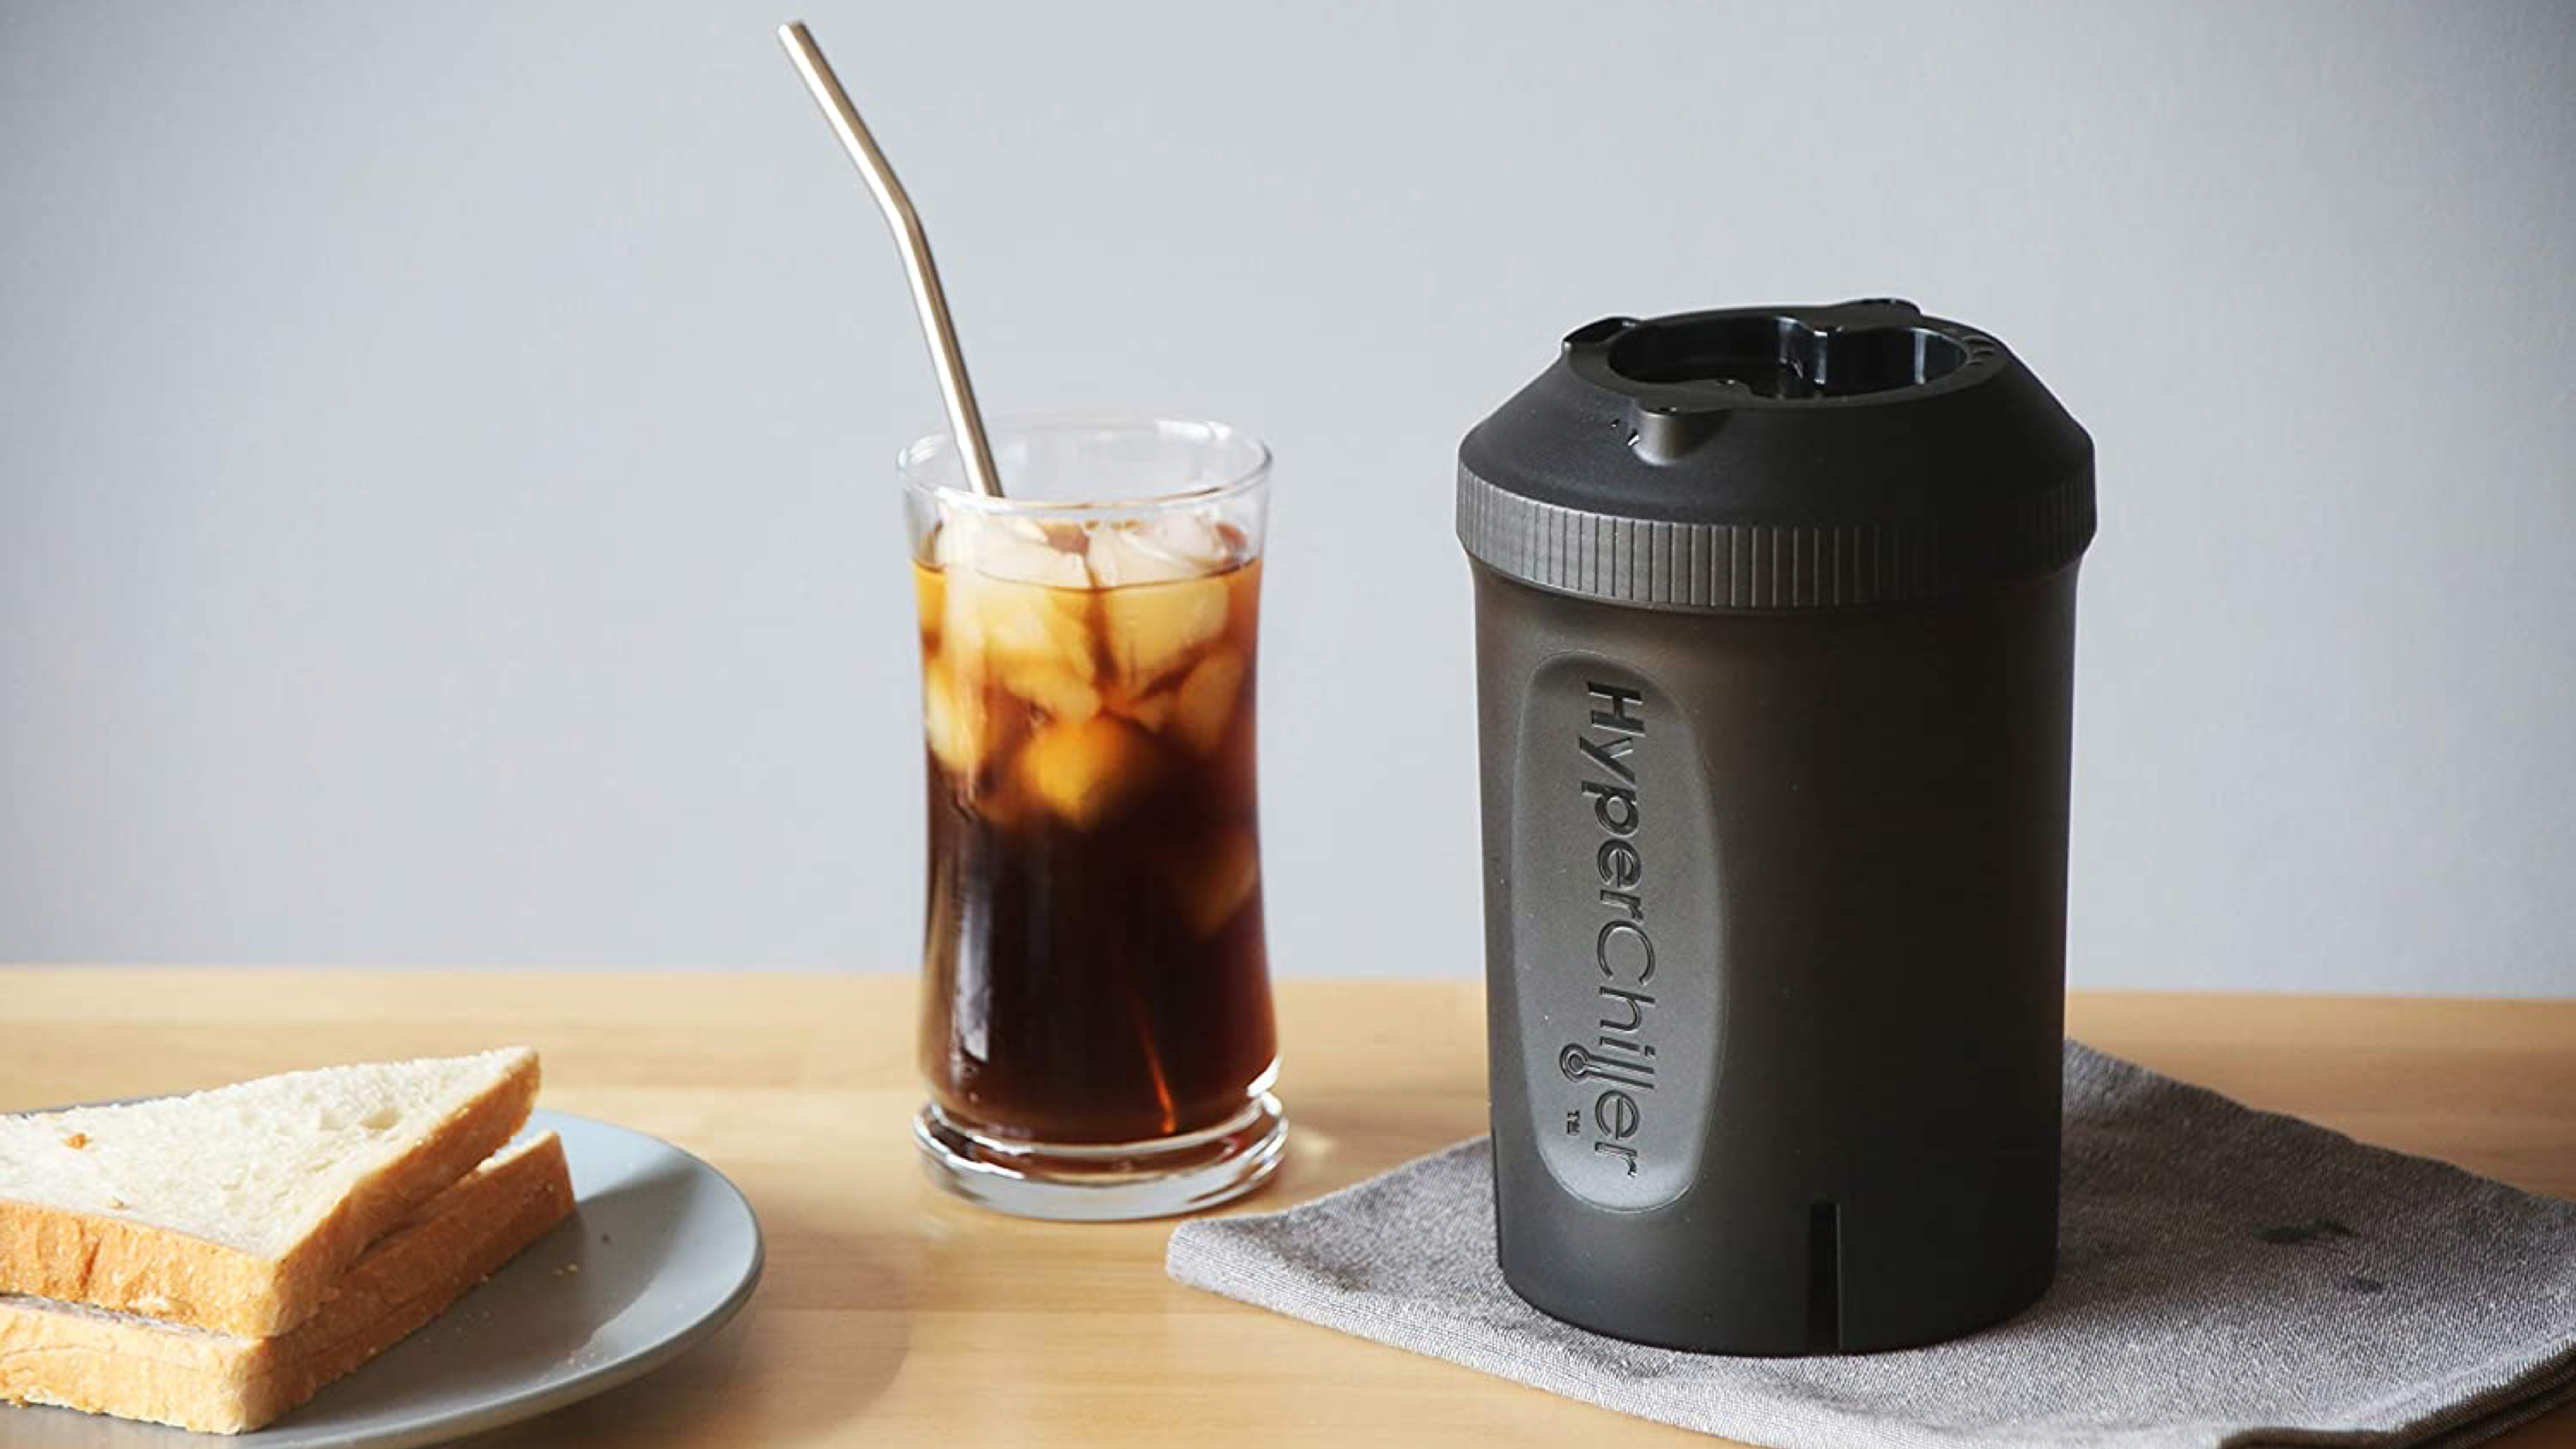 hyper chiller makes iced coffee in less than 60 seconds